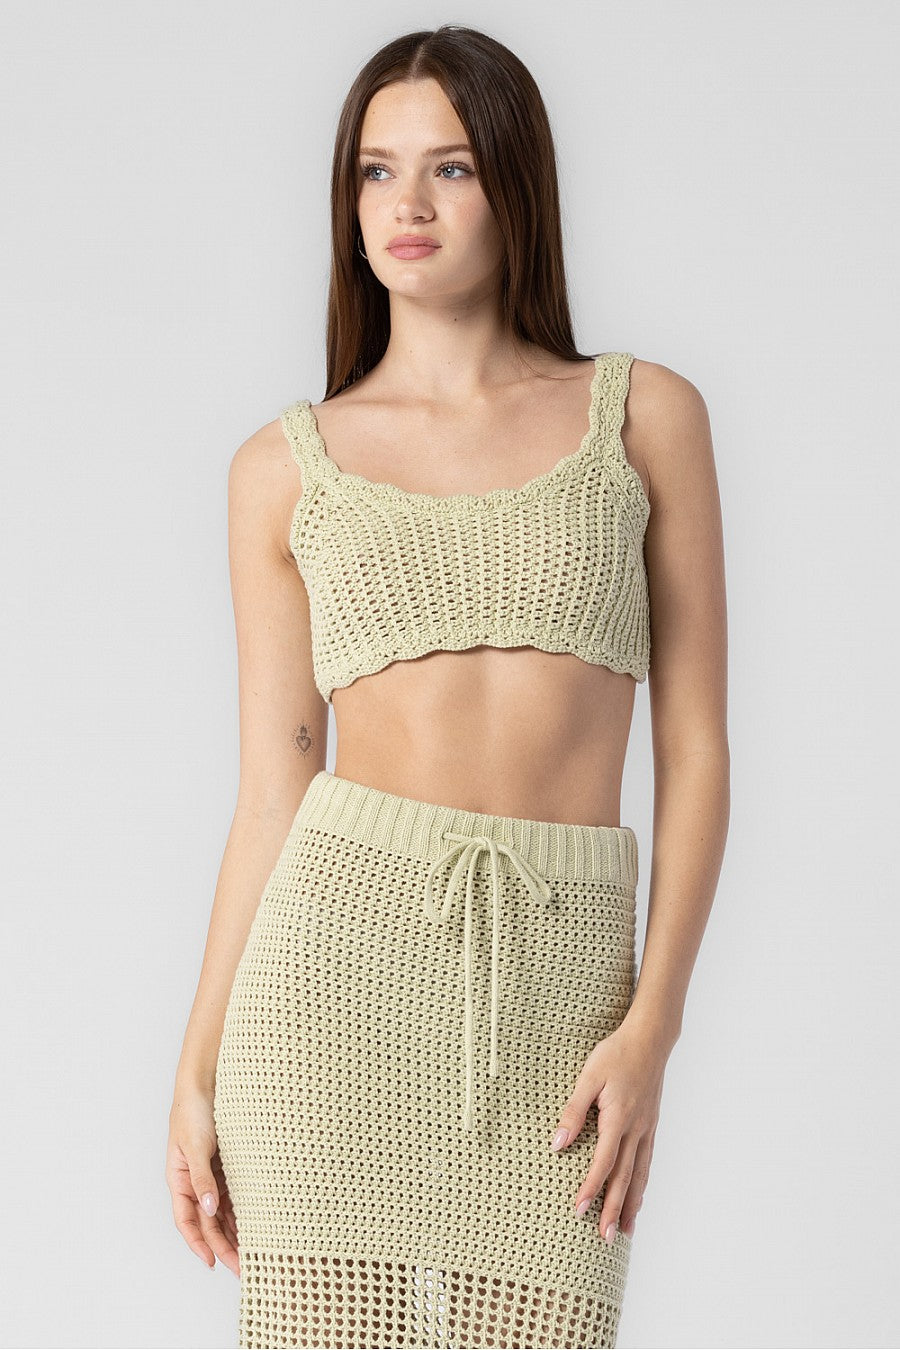 knitted crochet bralette top in the color sage.